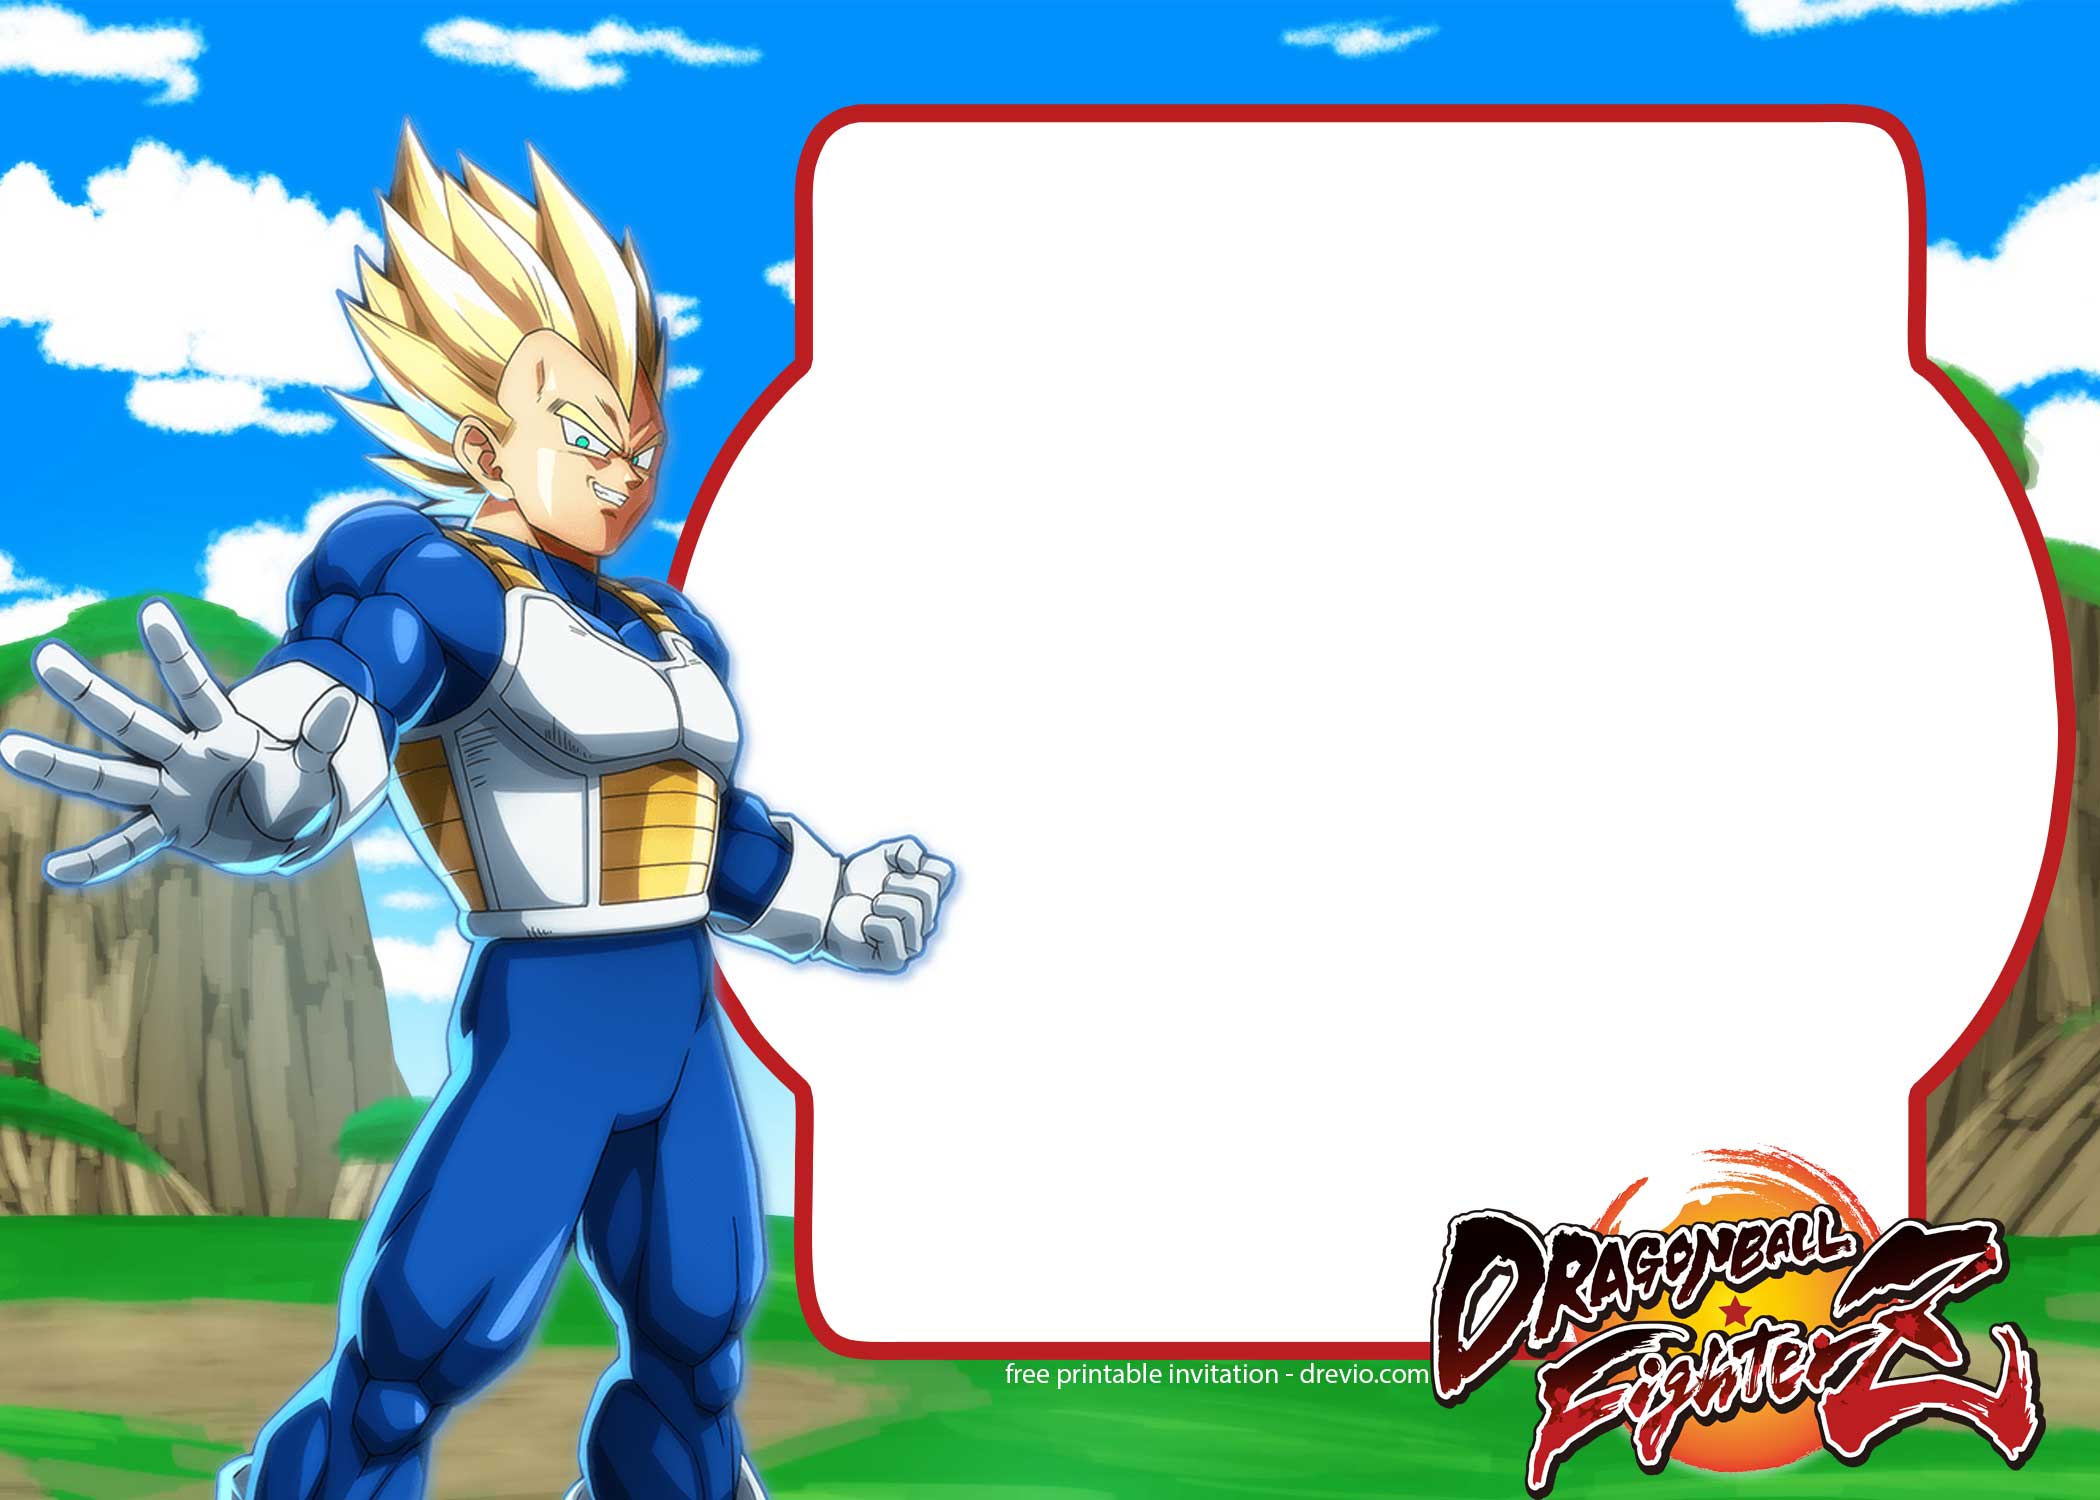 free-dragon-ball-fighter-z-invitation-template-download-hundreds-free